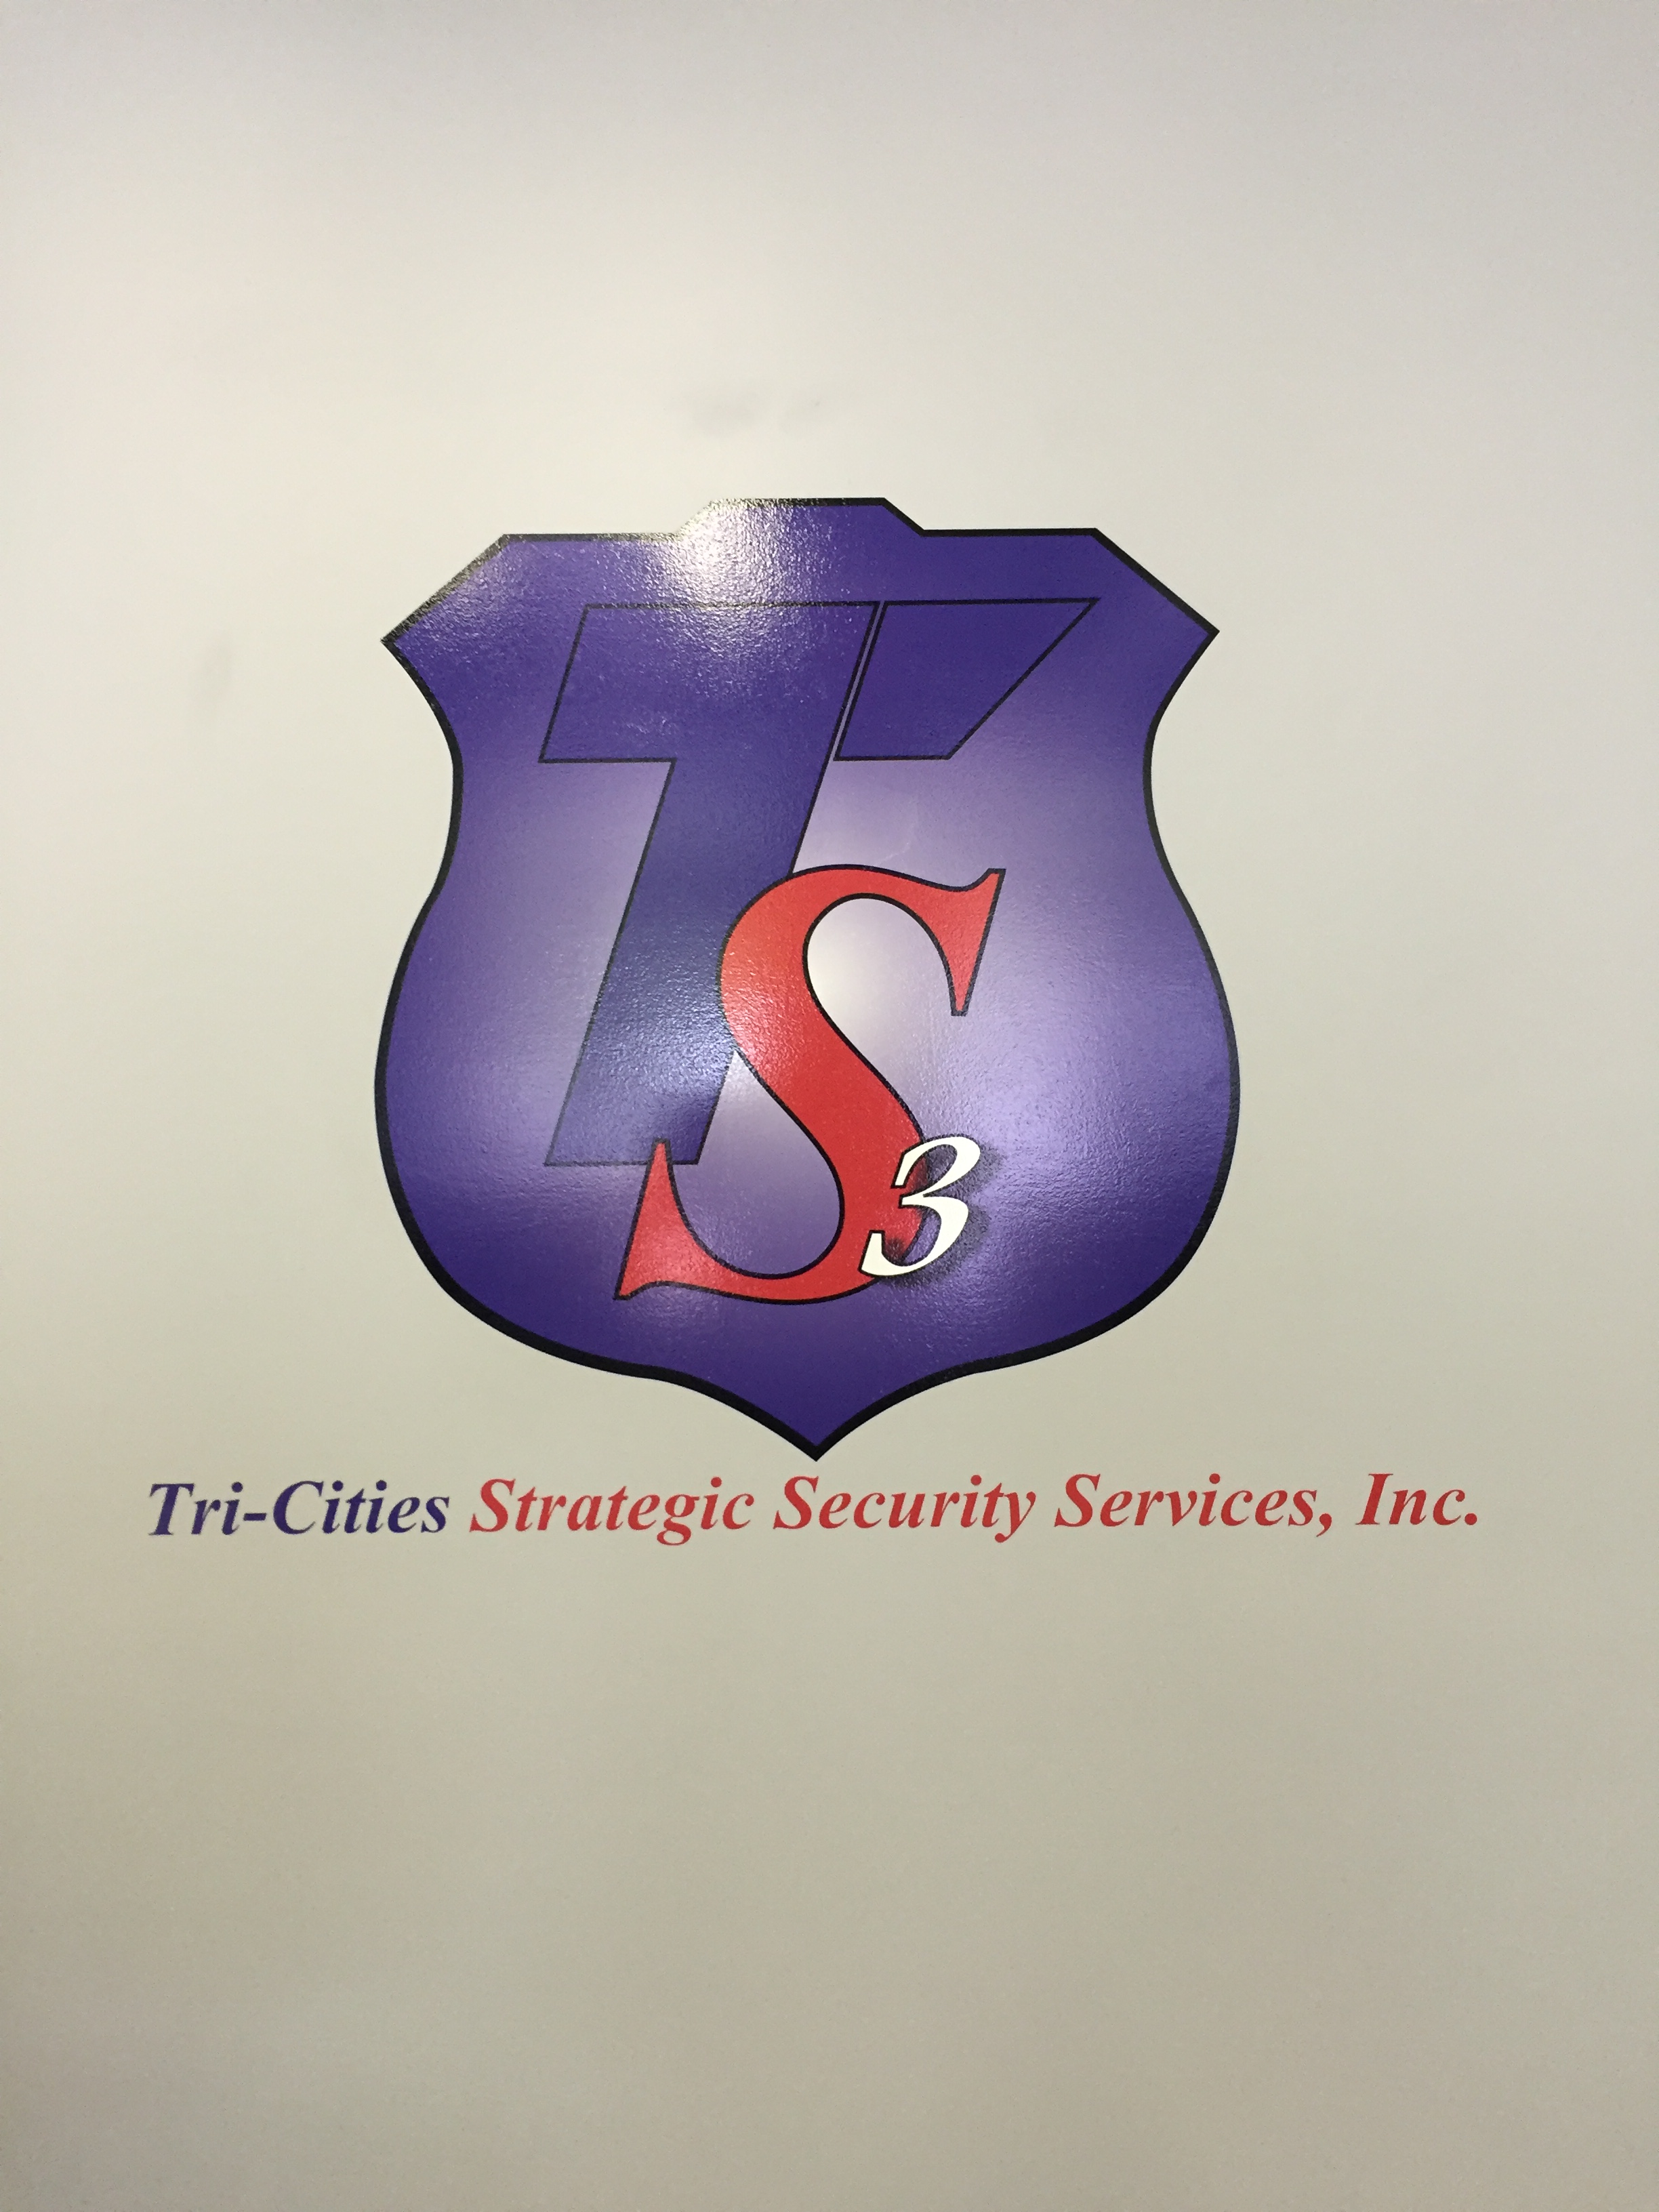 Tri-Cities Strategic Security Services logo graphic on wall